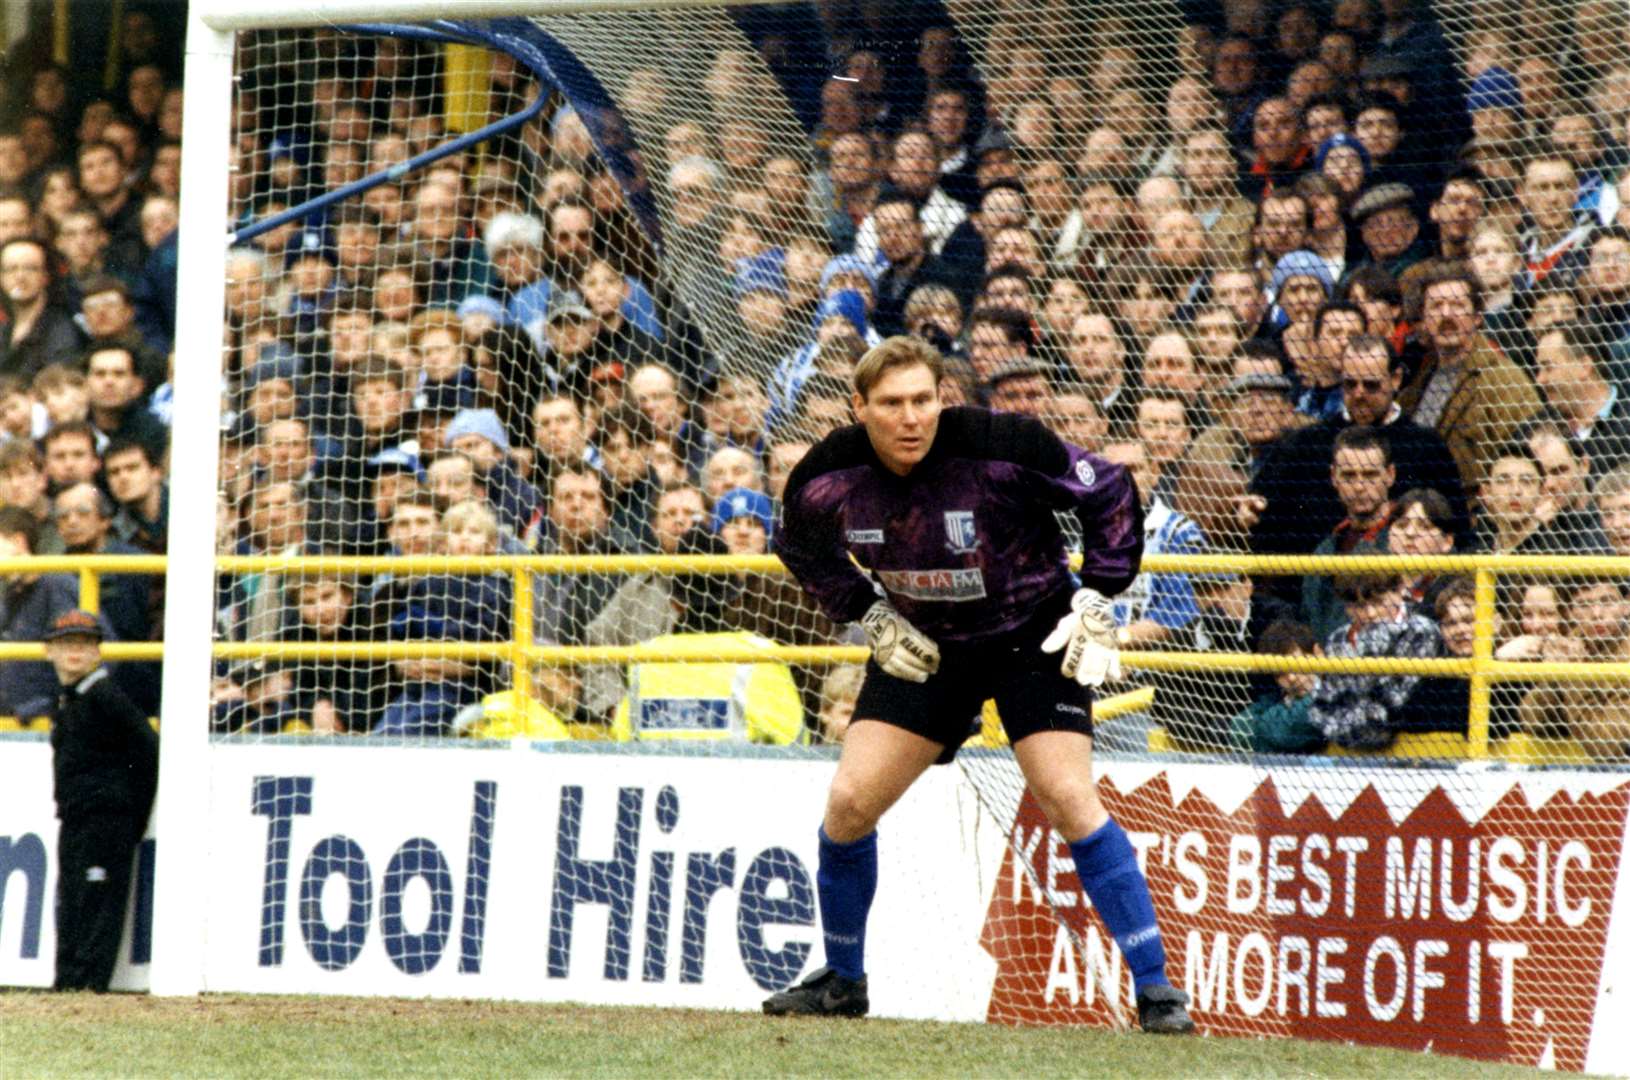 Jim Stannard in action for Gillingham during his record-breaking 1995/96 campaign